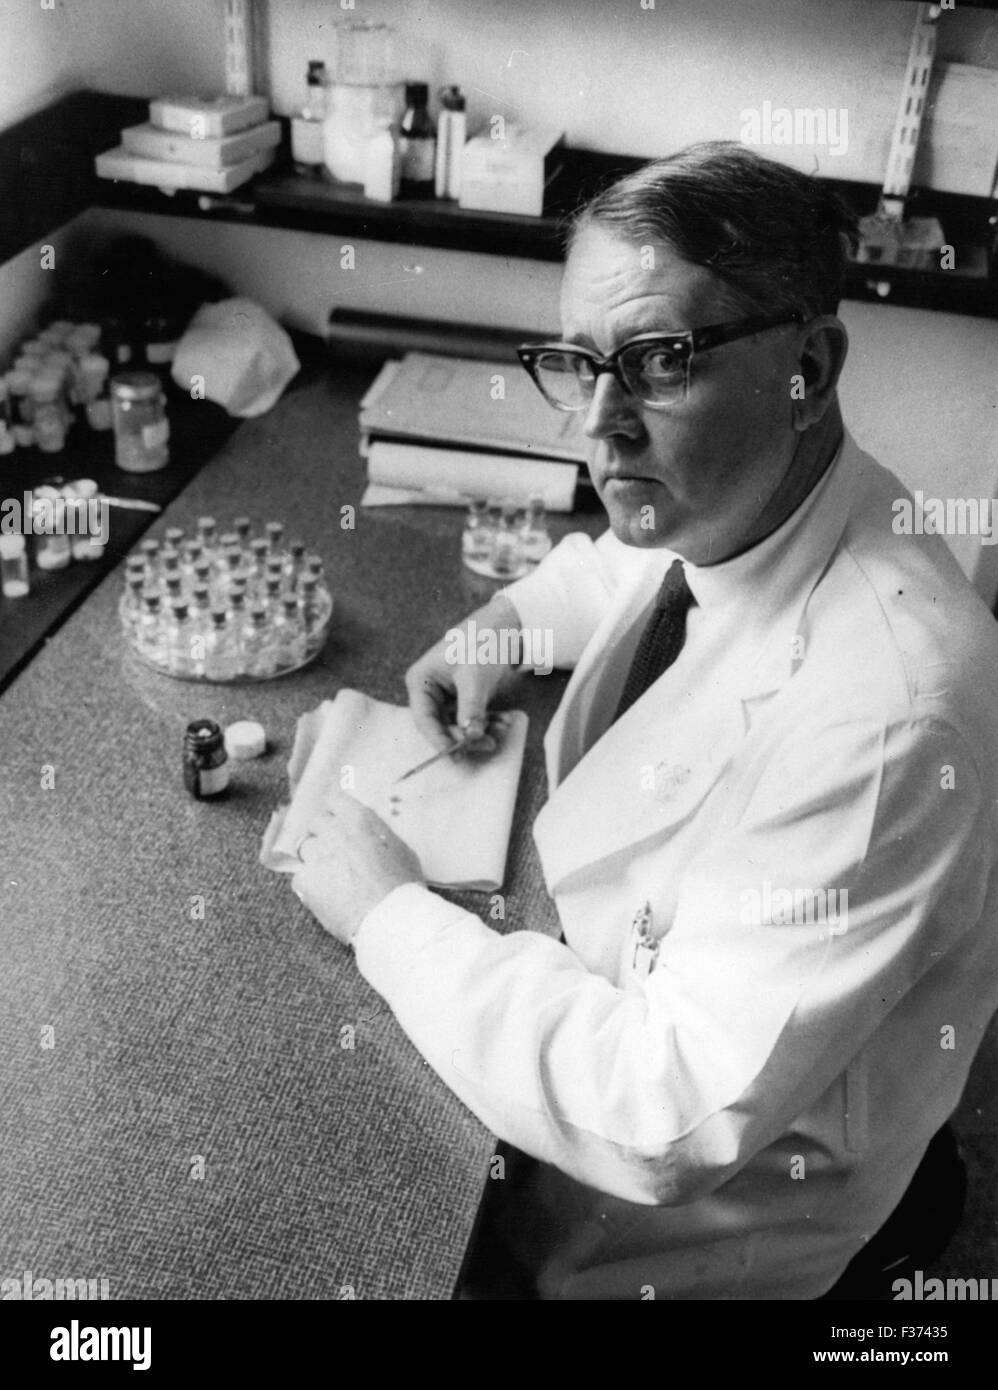 Dec. 21, 1955 - New treatment gives hope to childless wives A new treatment giving hope to childless wives who want a baby of their own, has been developed by Dr. Carl Gemzell, 50-year old professor of the Caroline Hospital in Stockholm. The first two of six women given the new treatment have both had twins. Hormones are given by injection. The treatment lasts a month. Dr. Gemzell described the case of Mother no. 2, who had been unable to have a baby throughout her seven years of marriage. Treatment began in January last year when the patient was given hormones for ten days, then ten days of s Stock Photo